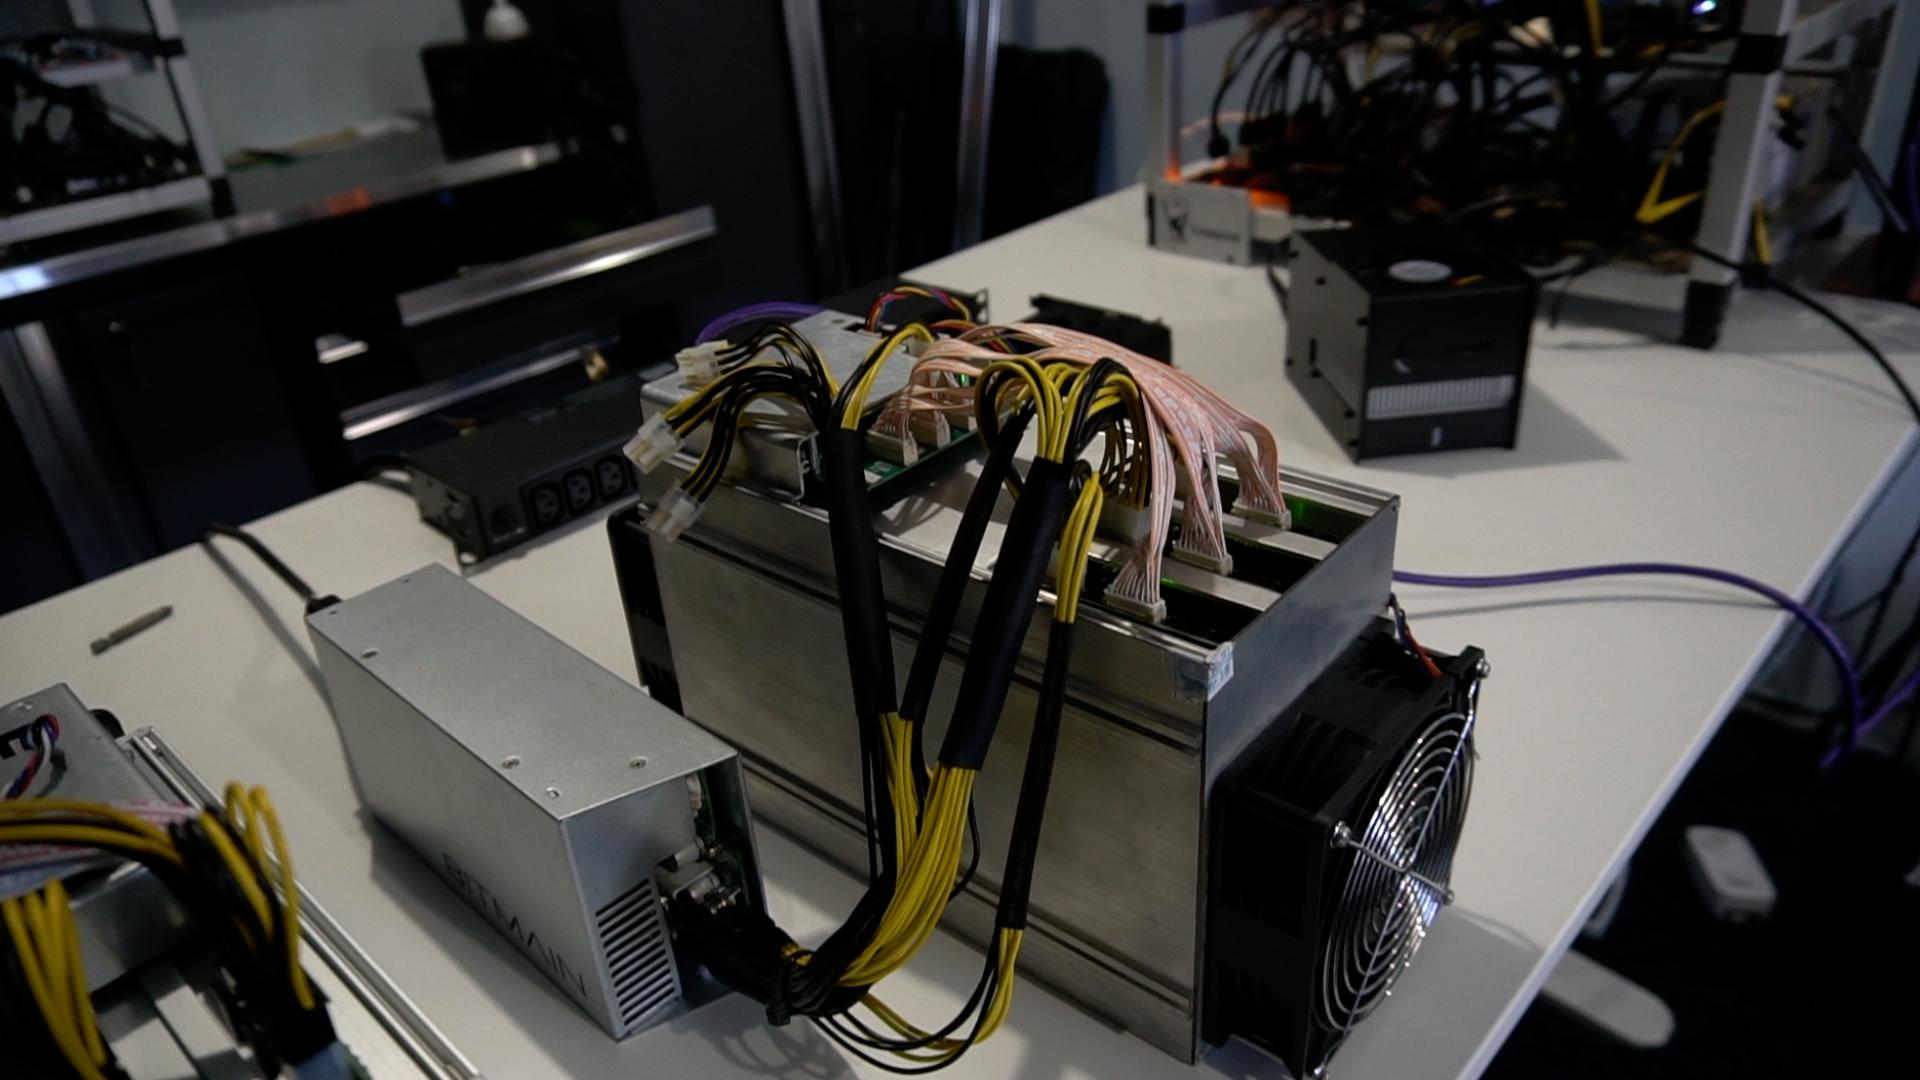 New Crypto Mining Rig able to mine $51 a DAY?! - VoskCoin ...